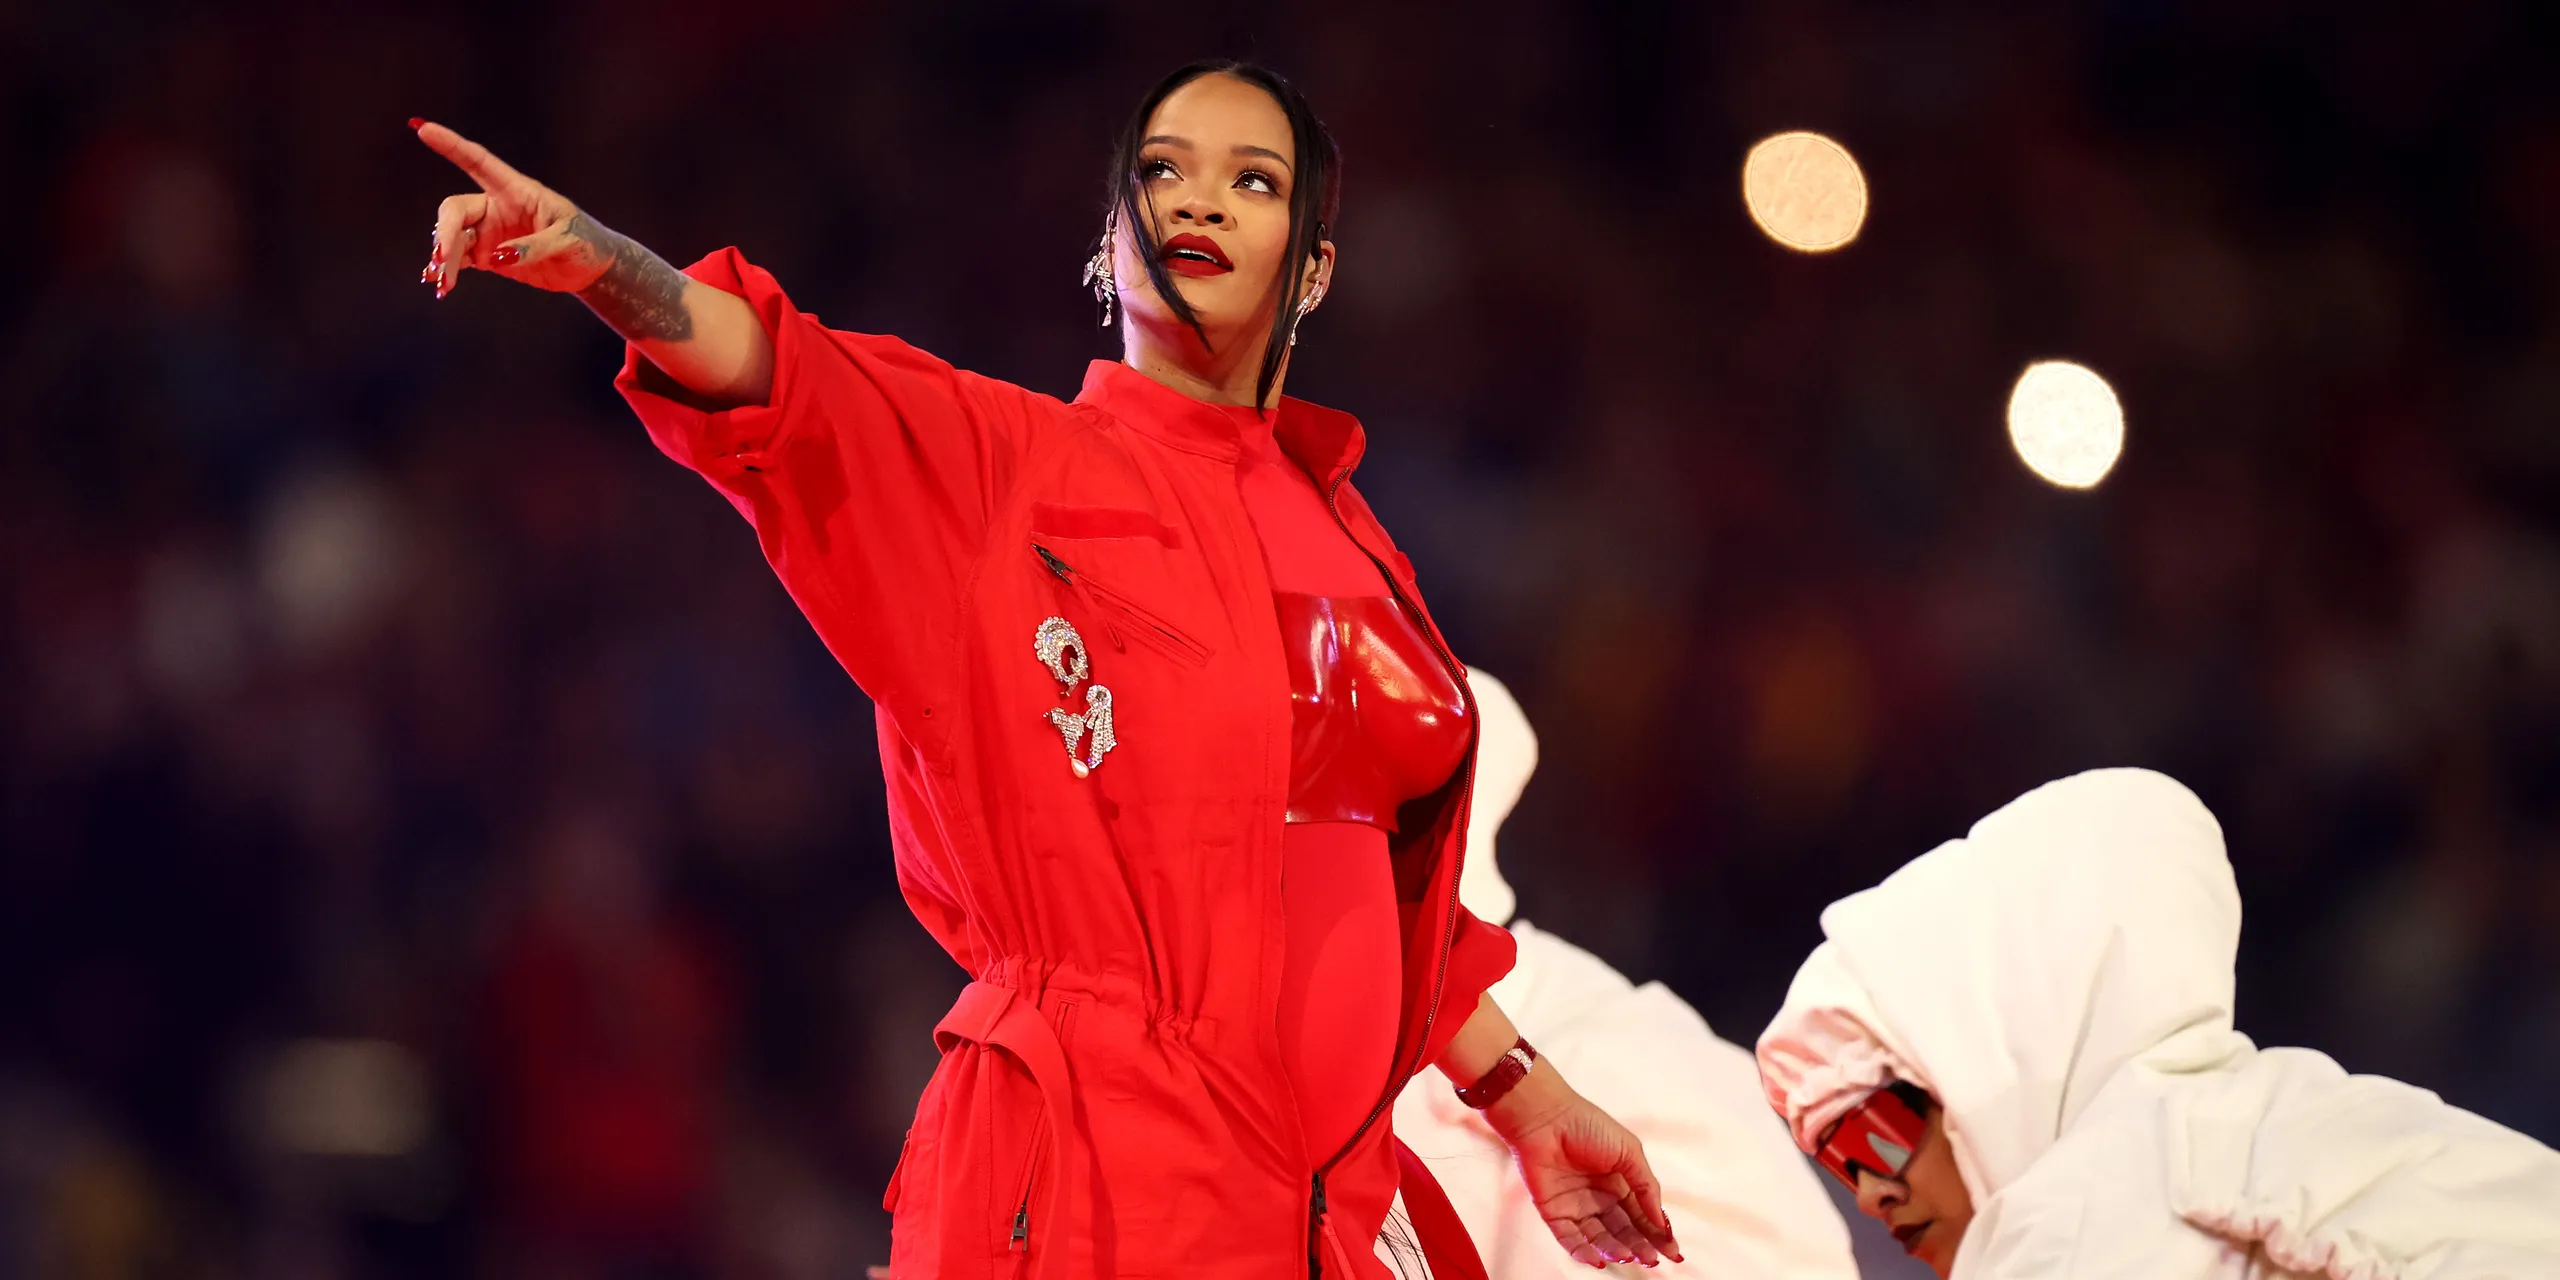 Rihanna announces she’s pregnant with baby no. 2 at the Super Bowl